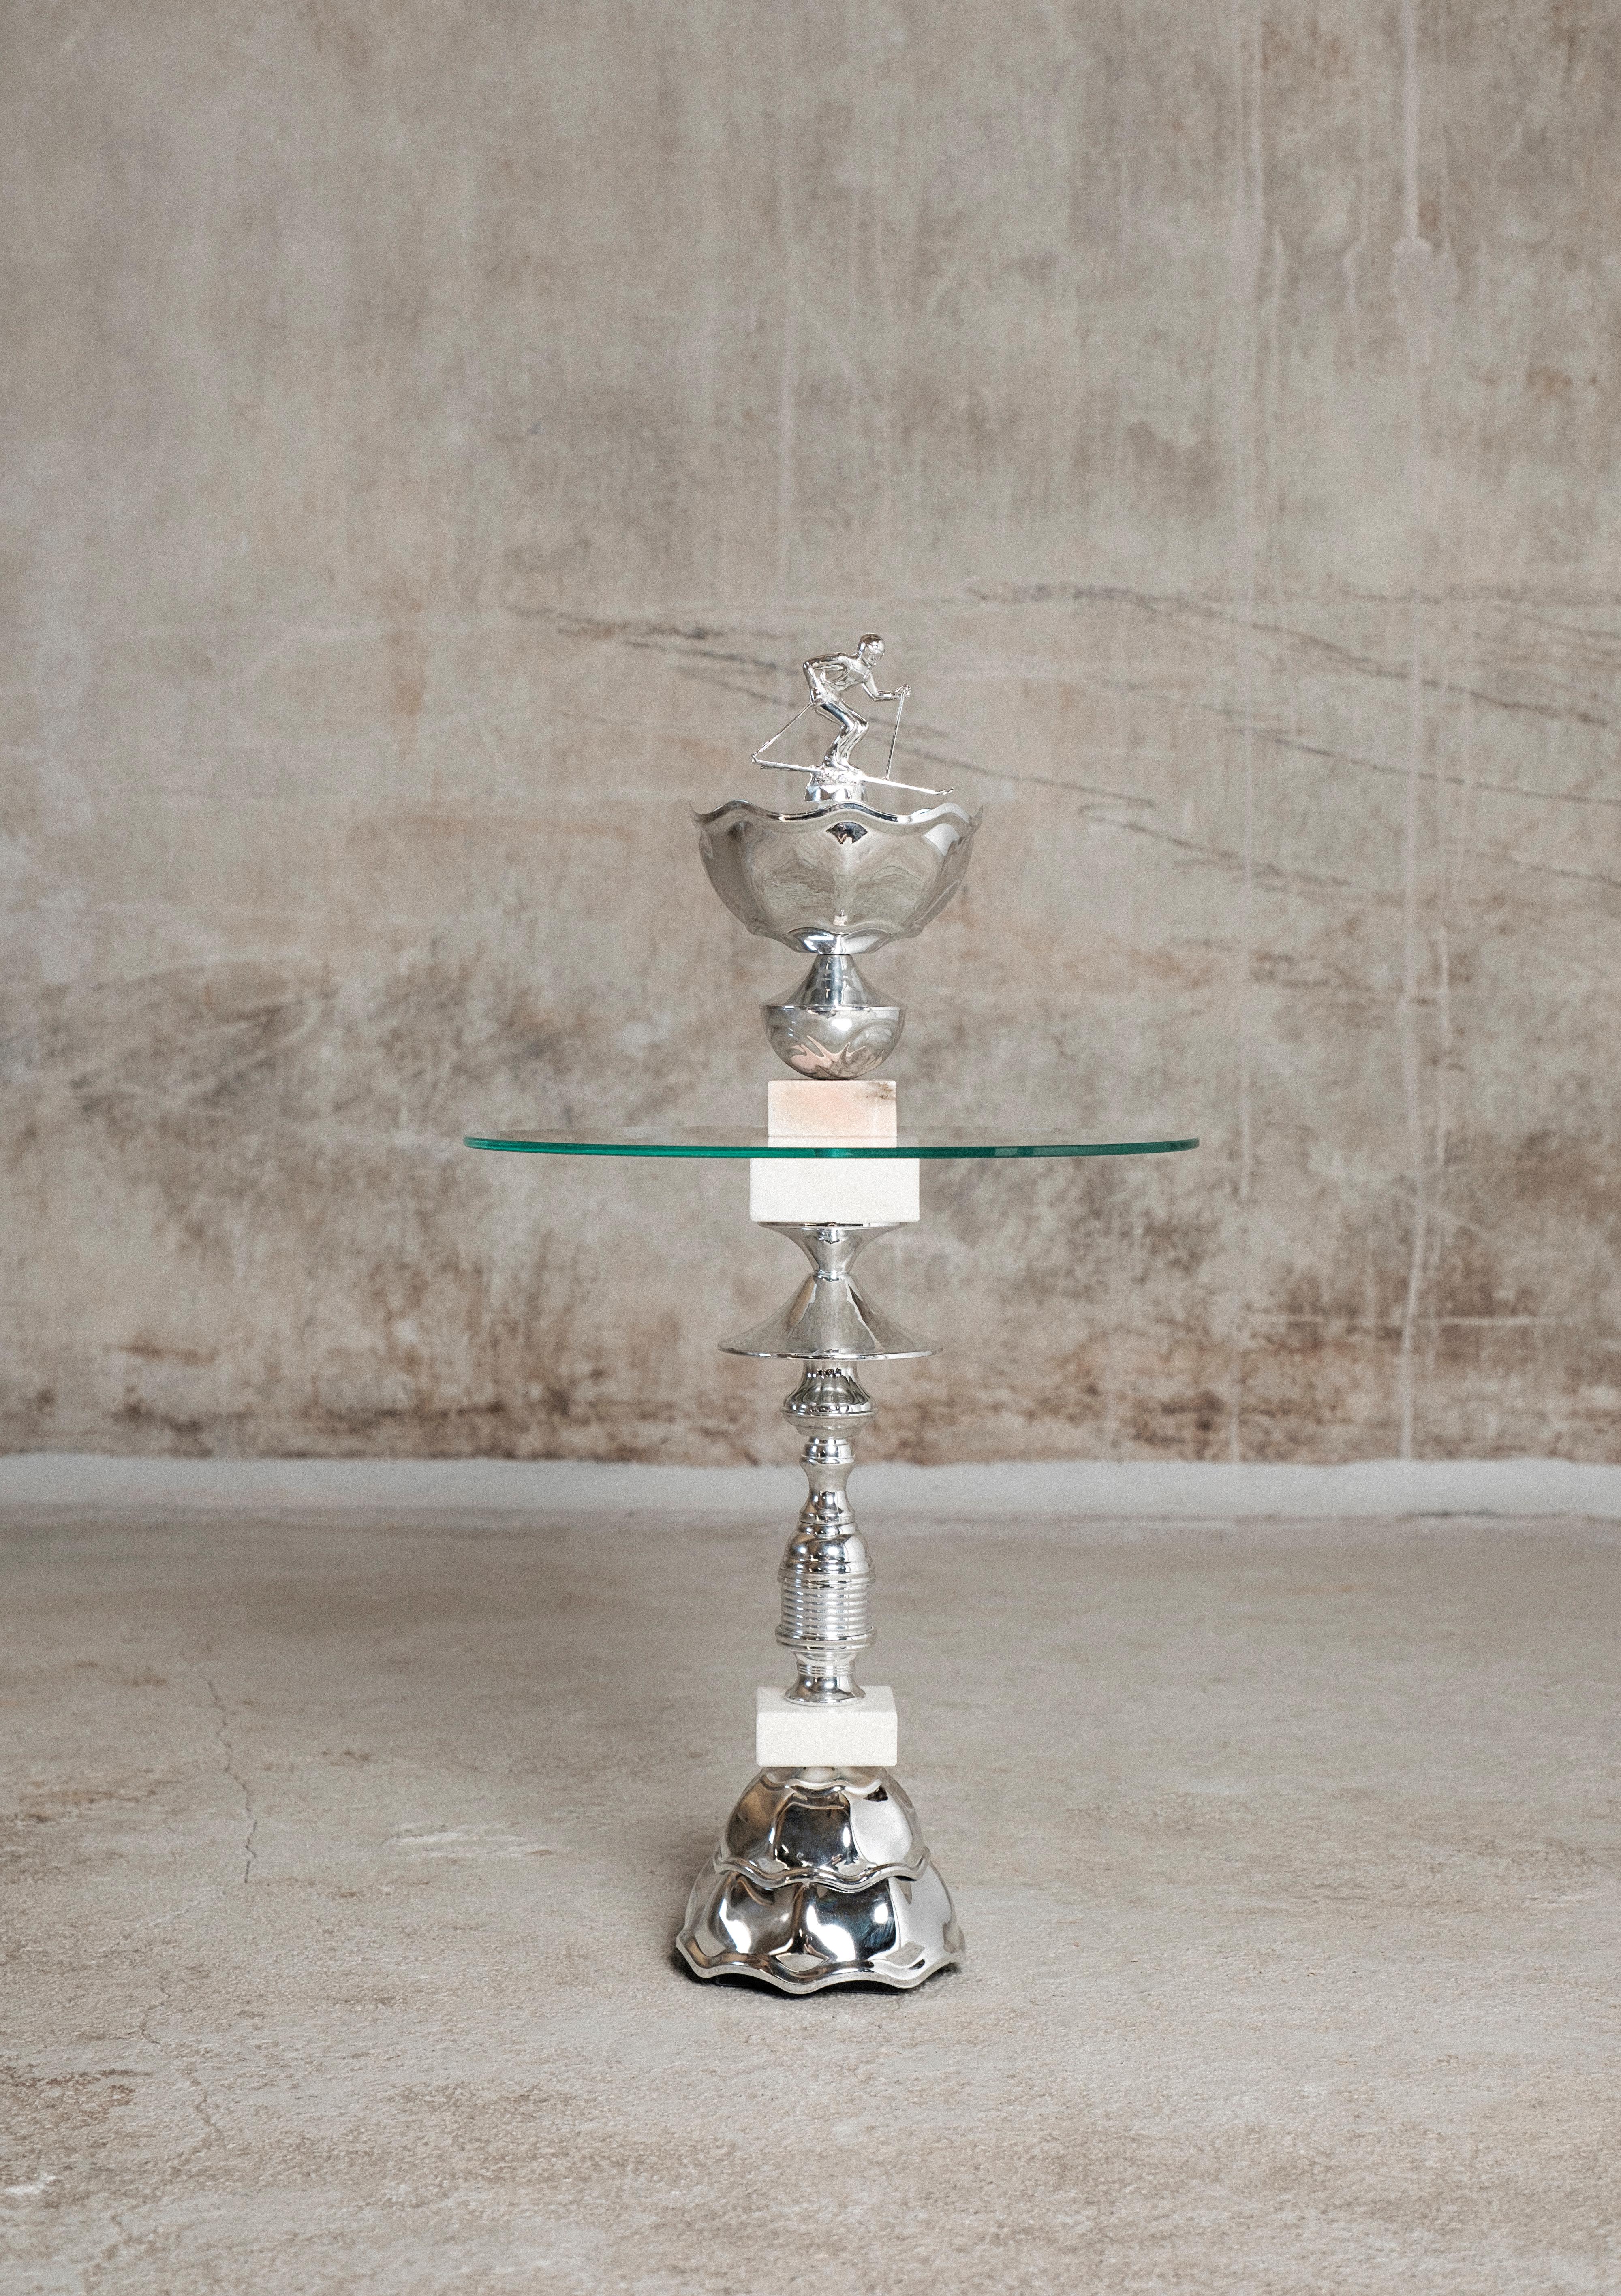 The Alpine Skier table by Flétta
Dimensions: 74 x 46 cm
Materials: silver, white, rose marble

Trophy is a collection of tables, lights, flowerpots and shelves made of old trophies collected from athletes and sports clubs in Iceland. Trophies are a